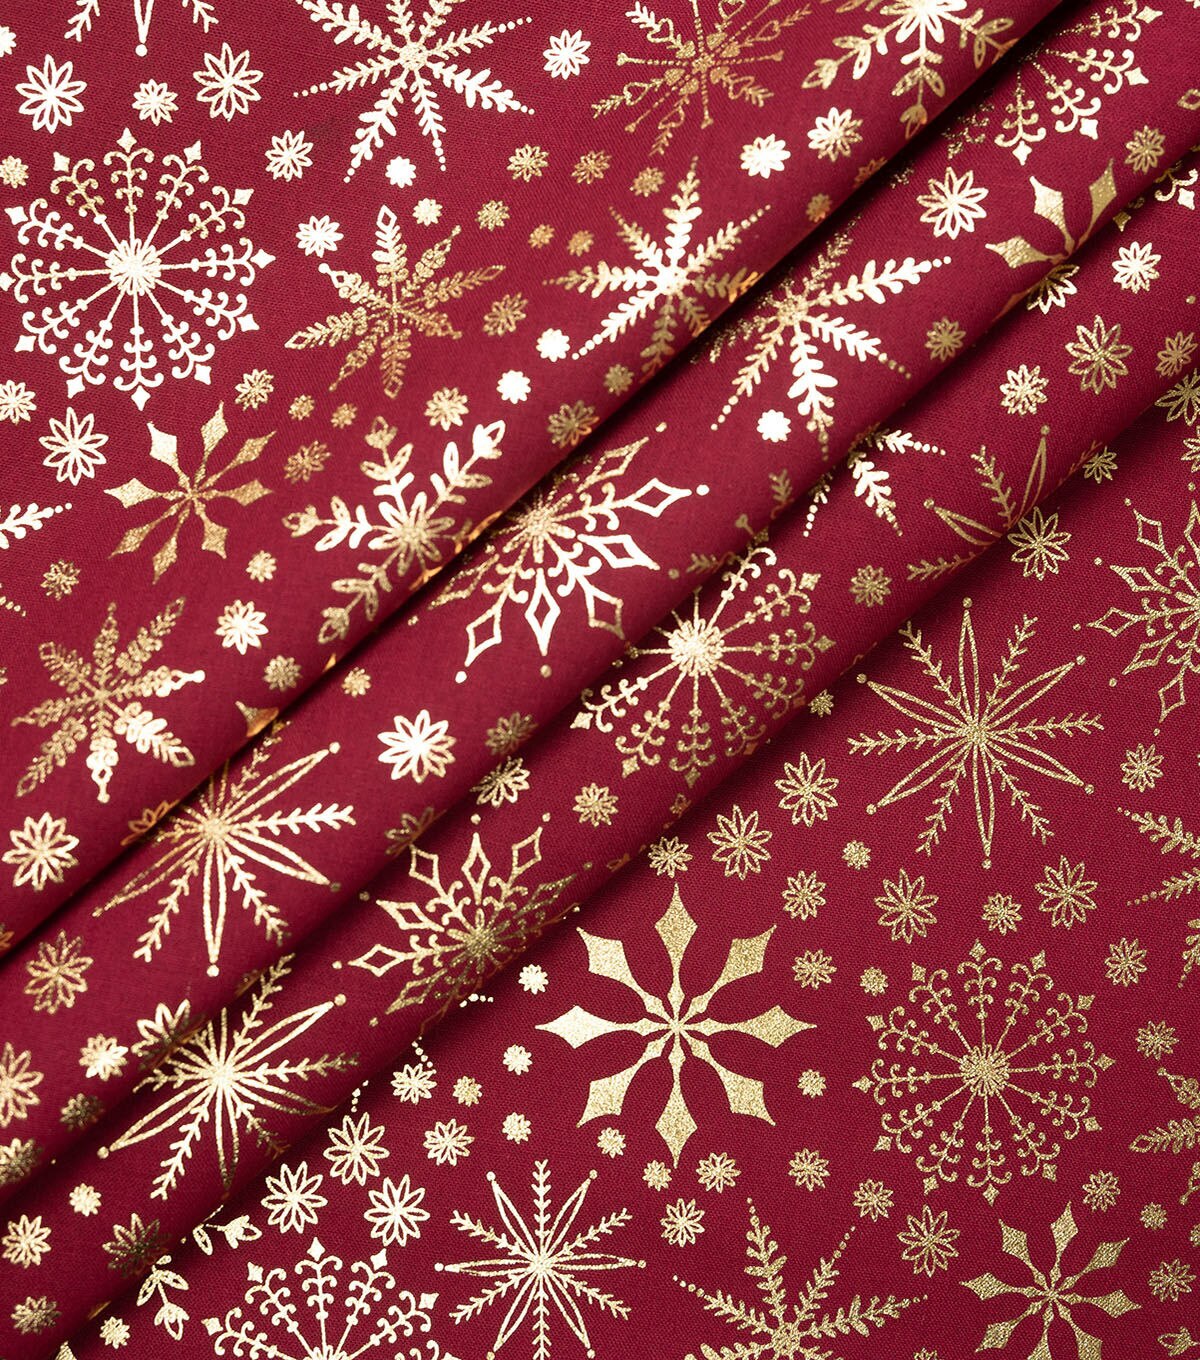 Printed Polyester Cotton Fabric Merry Christmas Red 